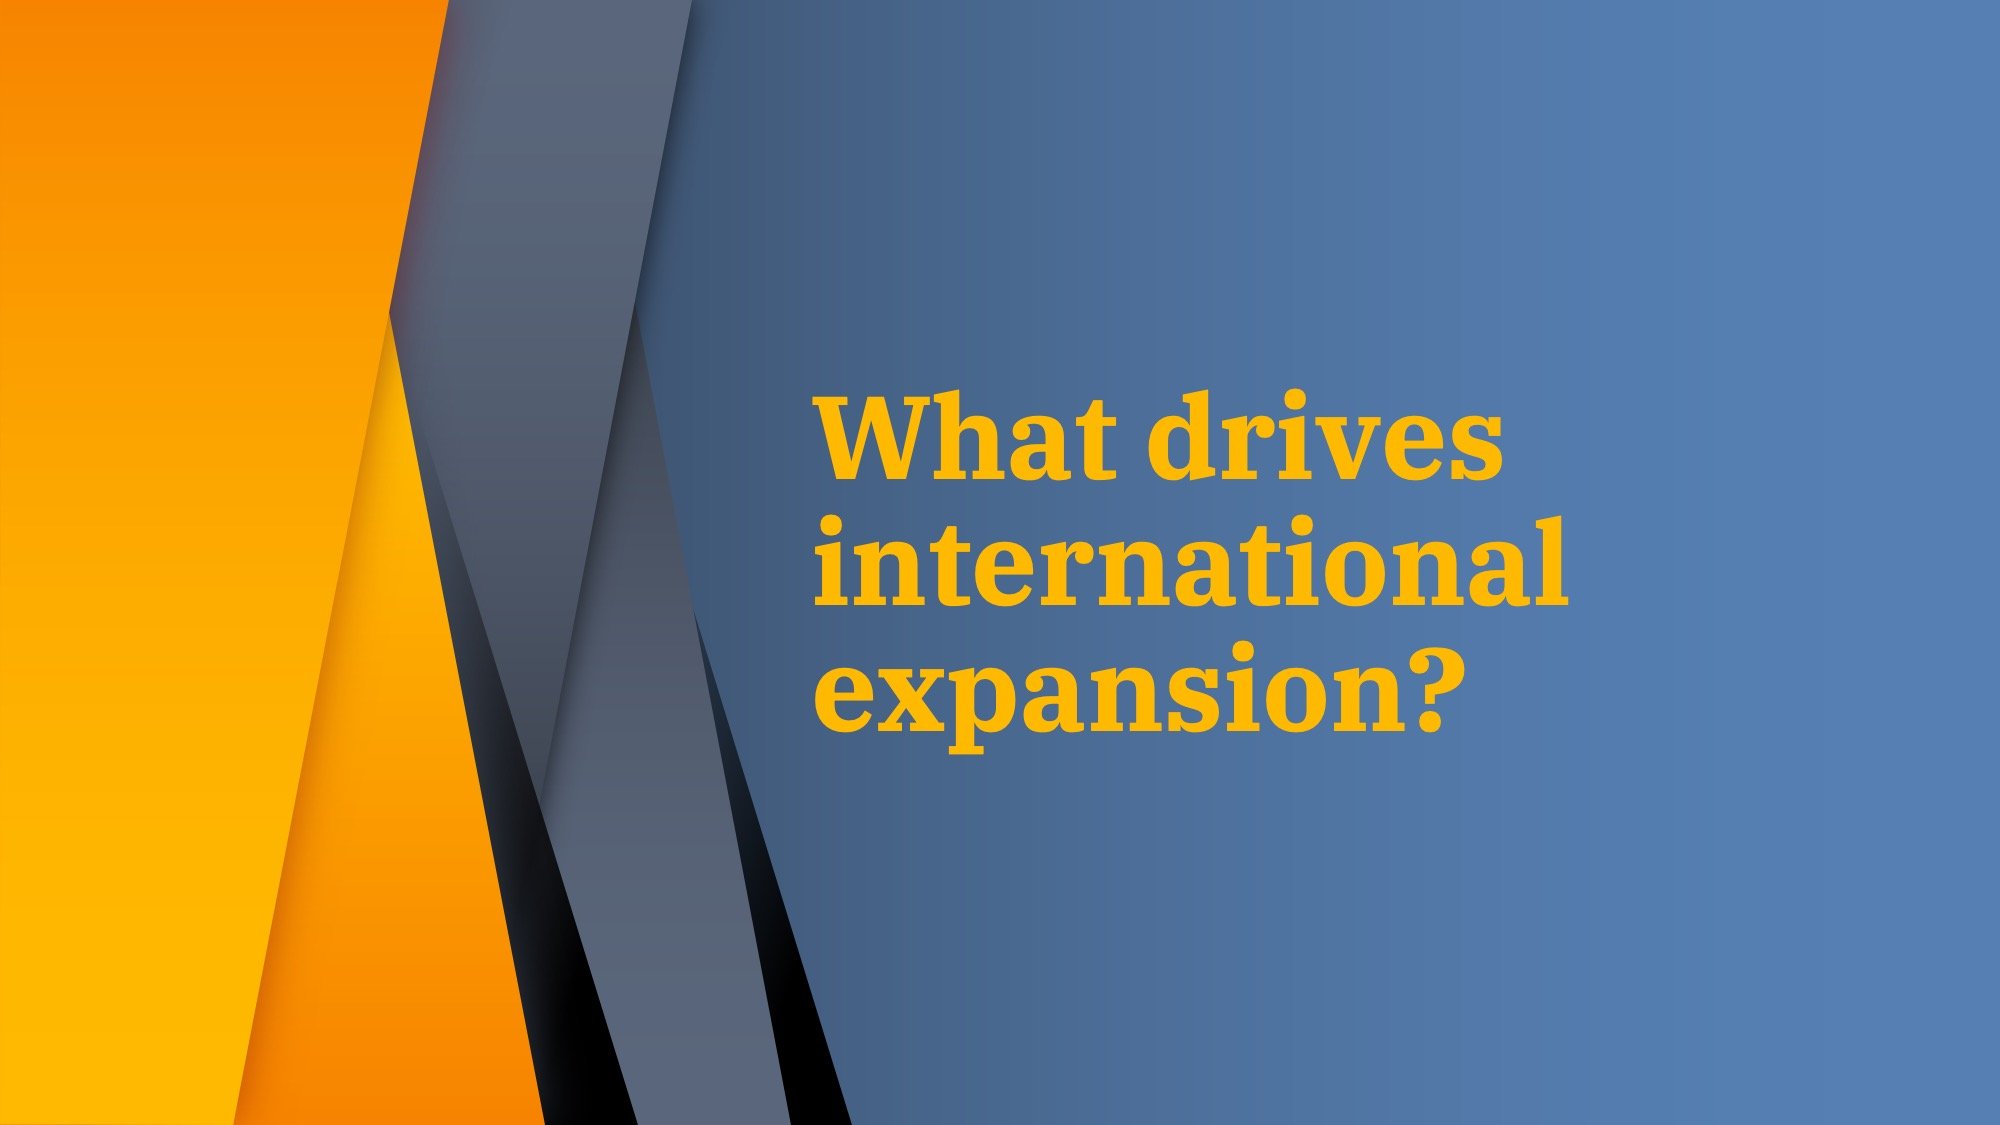 What drives international expansion?